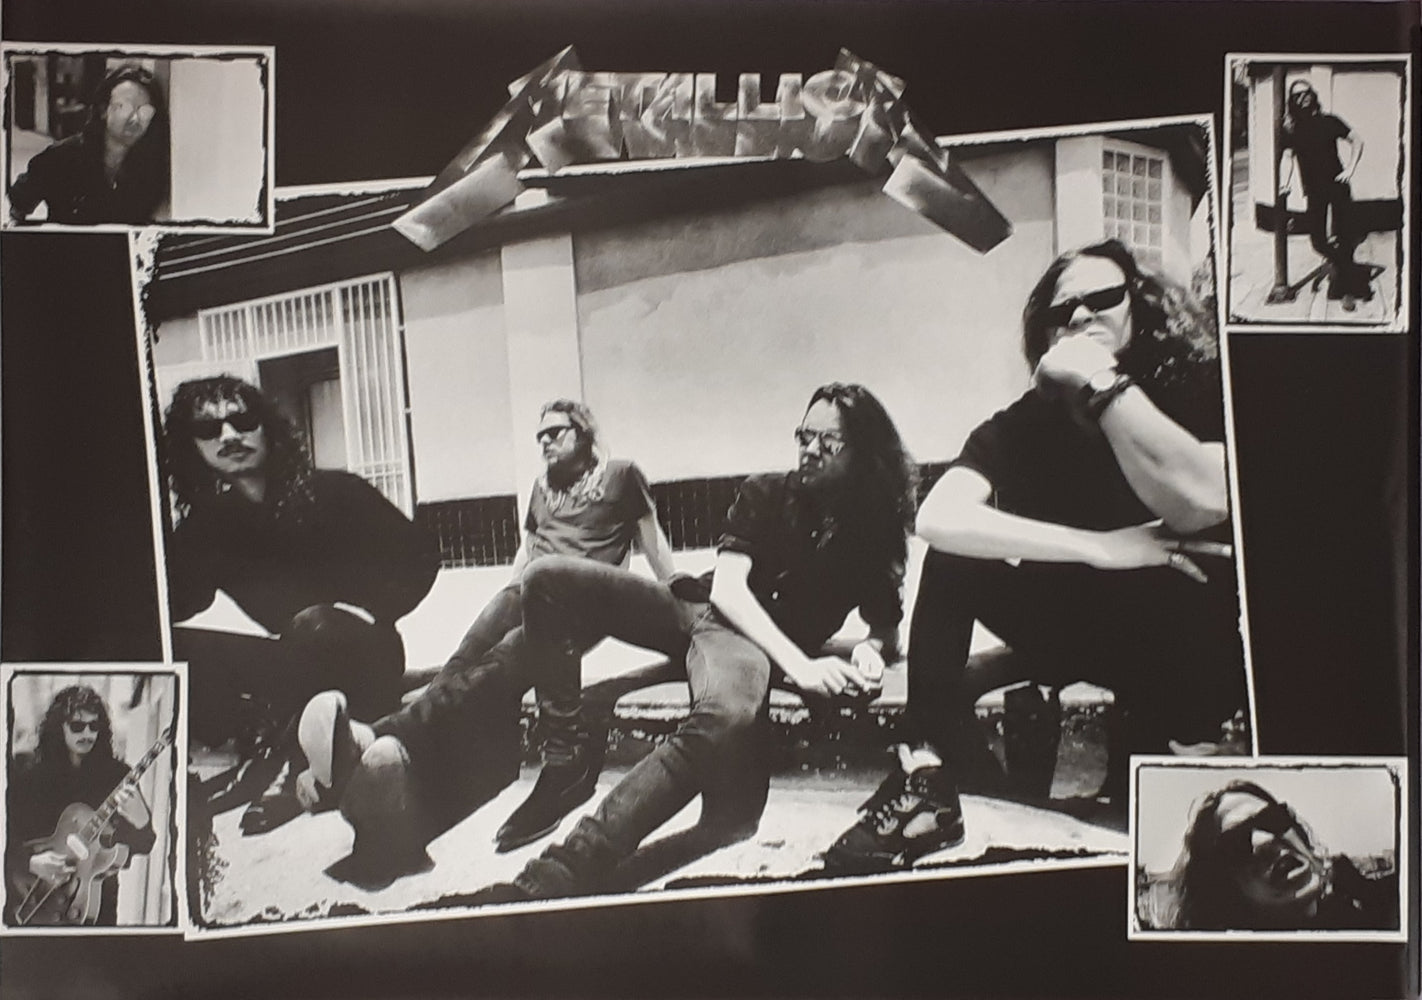 Metallica Group Montage Black And White 100x140cm Panoramic Giant Poster